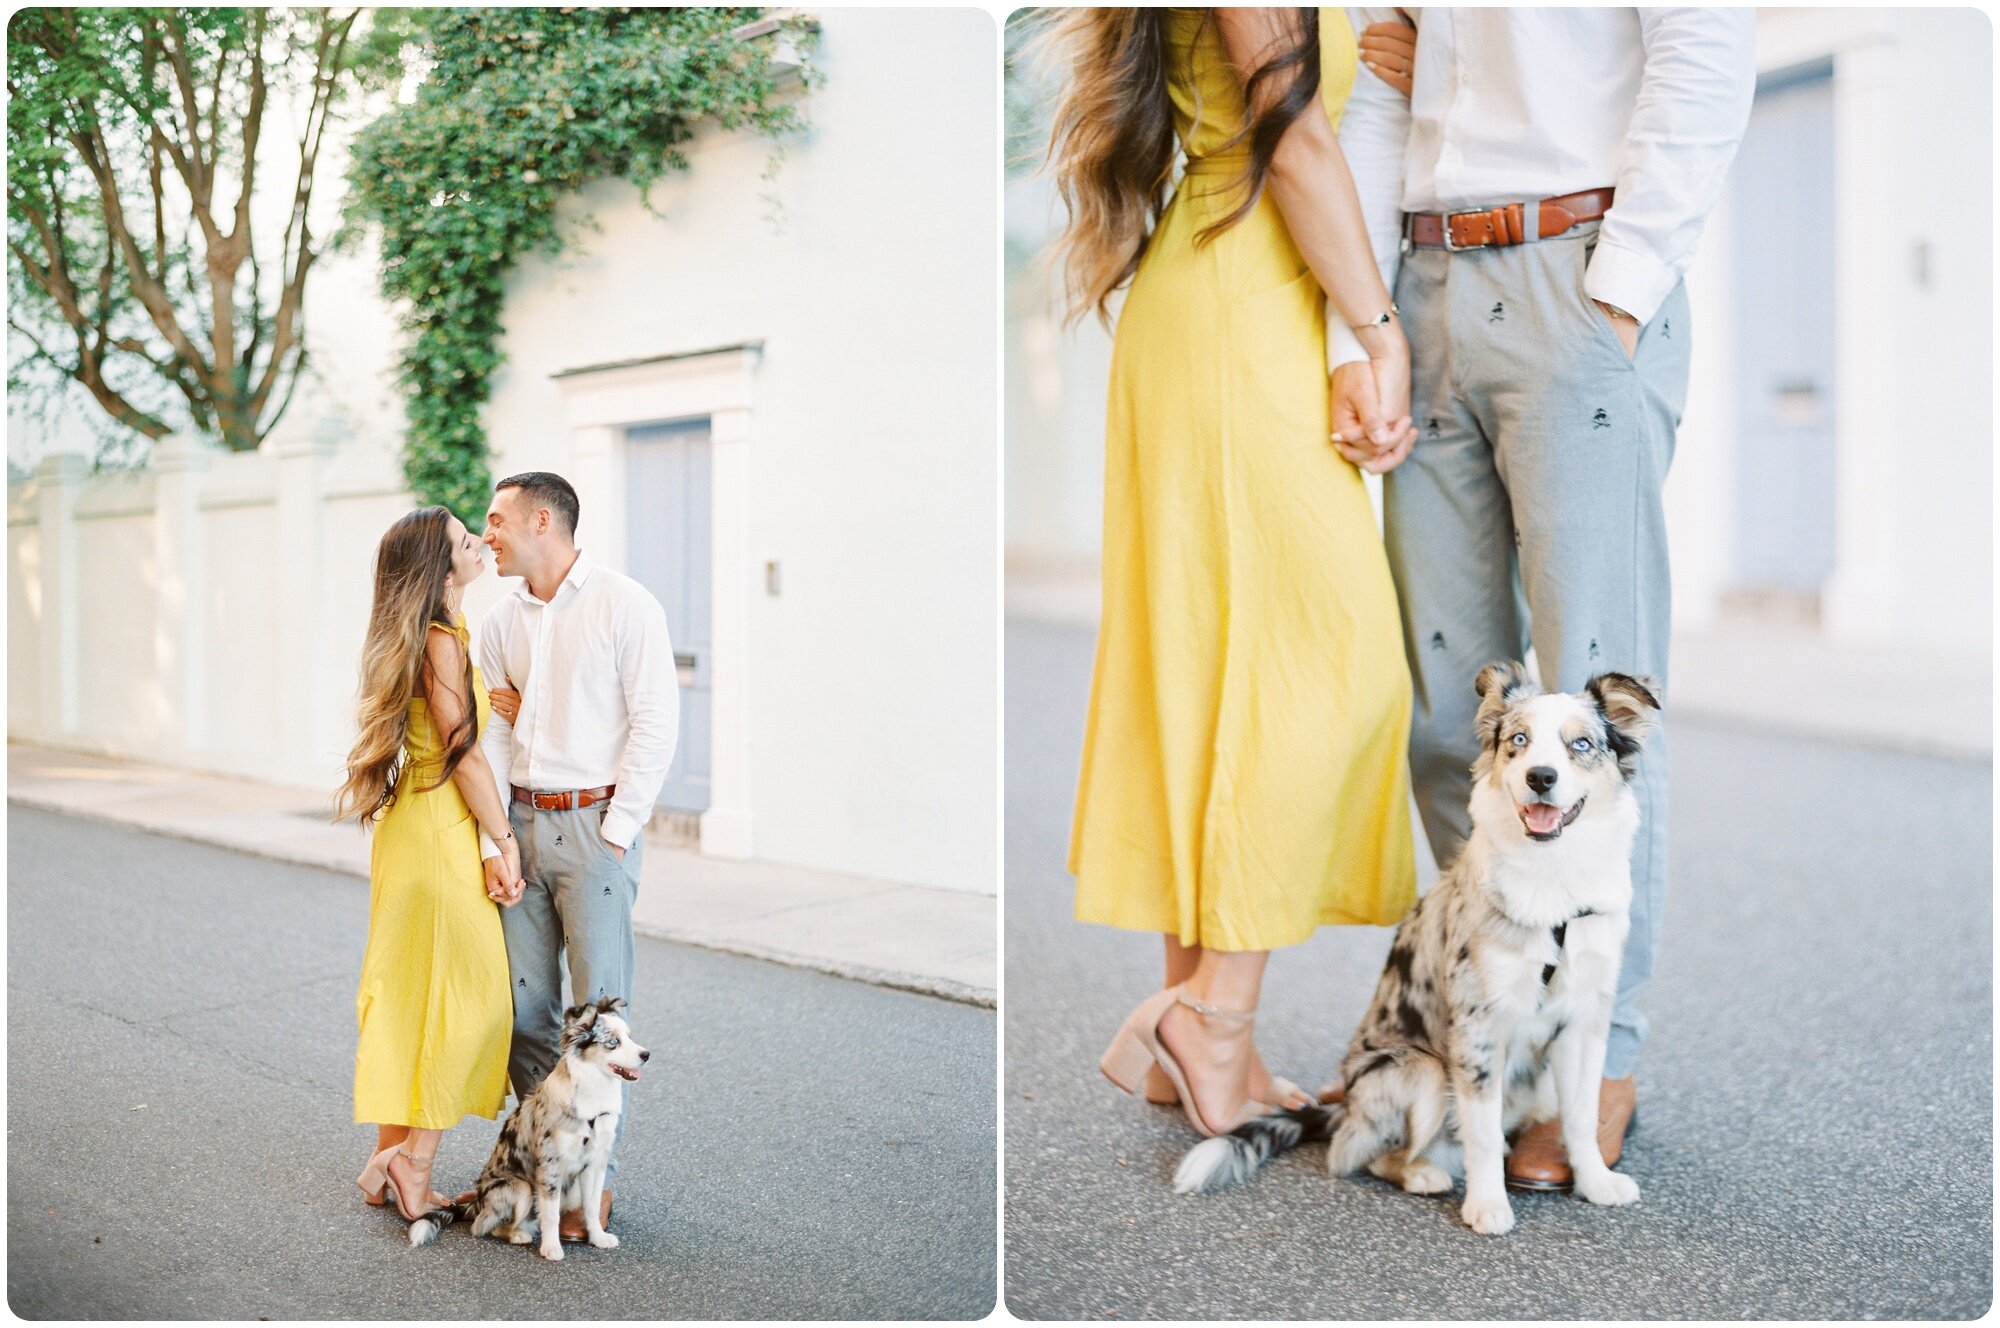 rainbow_row_yellow_blue_outfit_battery_downtown_charleston_engagement_puppy_outdoor_wedding_photographers_husband_wife_team_kailee_tim_kailee_dimeglio_photography_charleston_traveling_photographers_0010.jpg